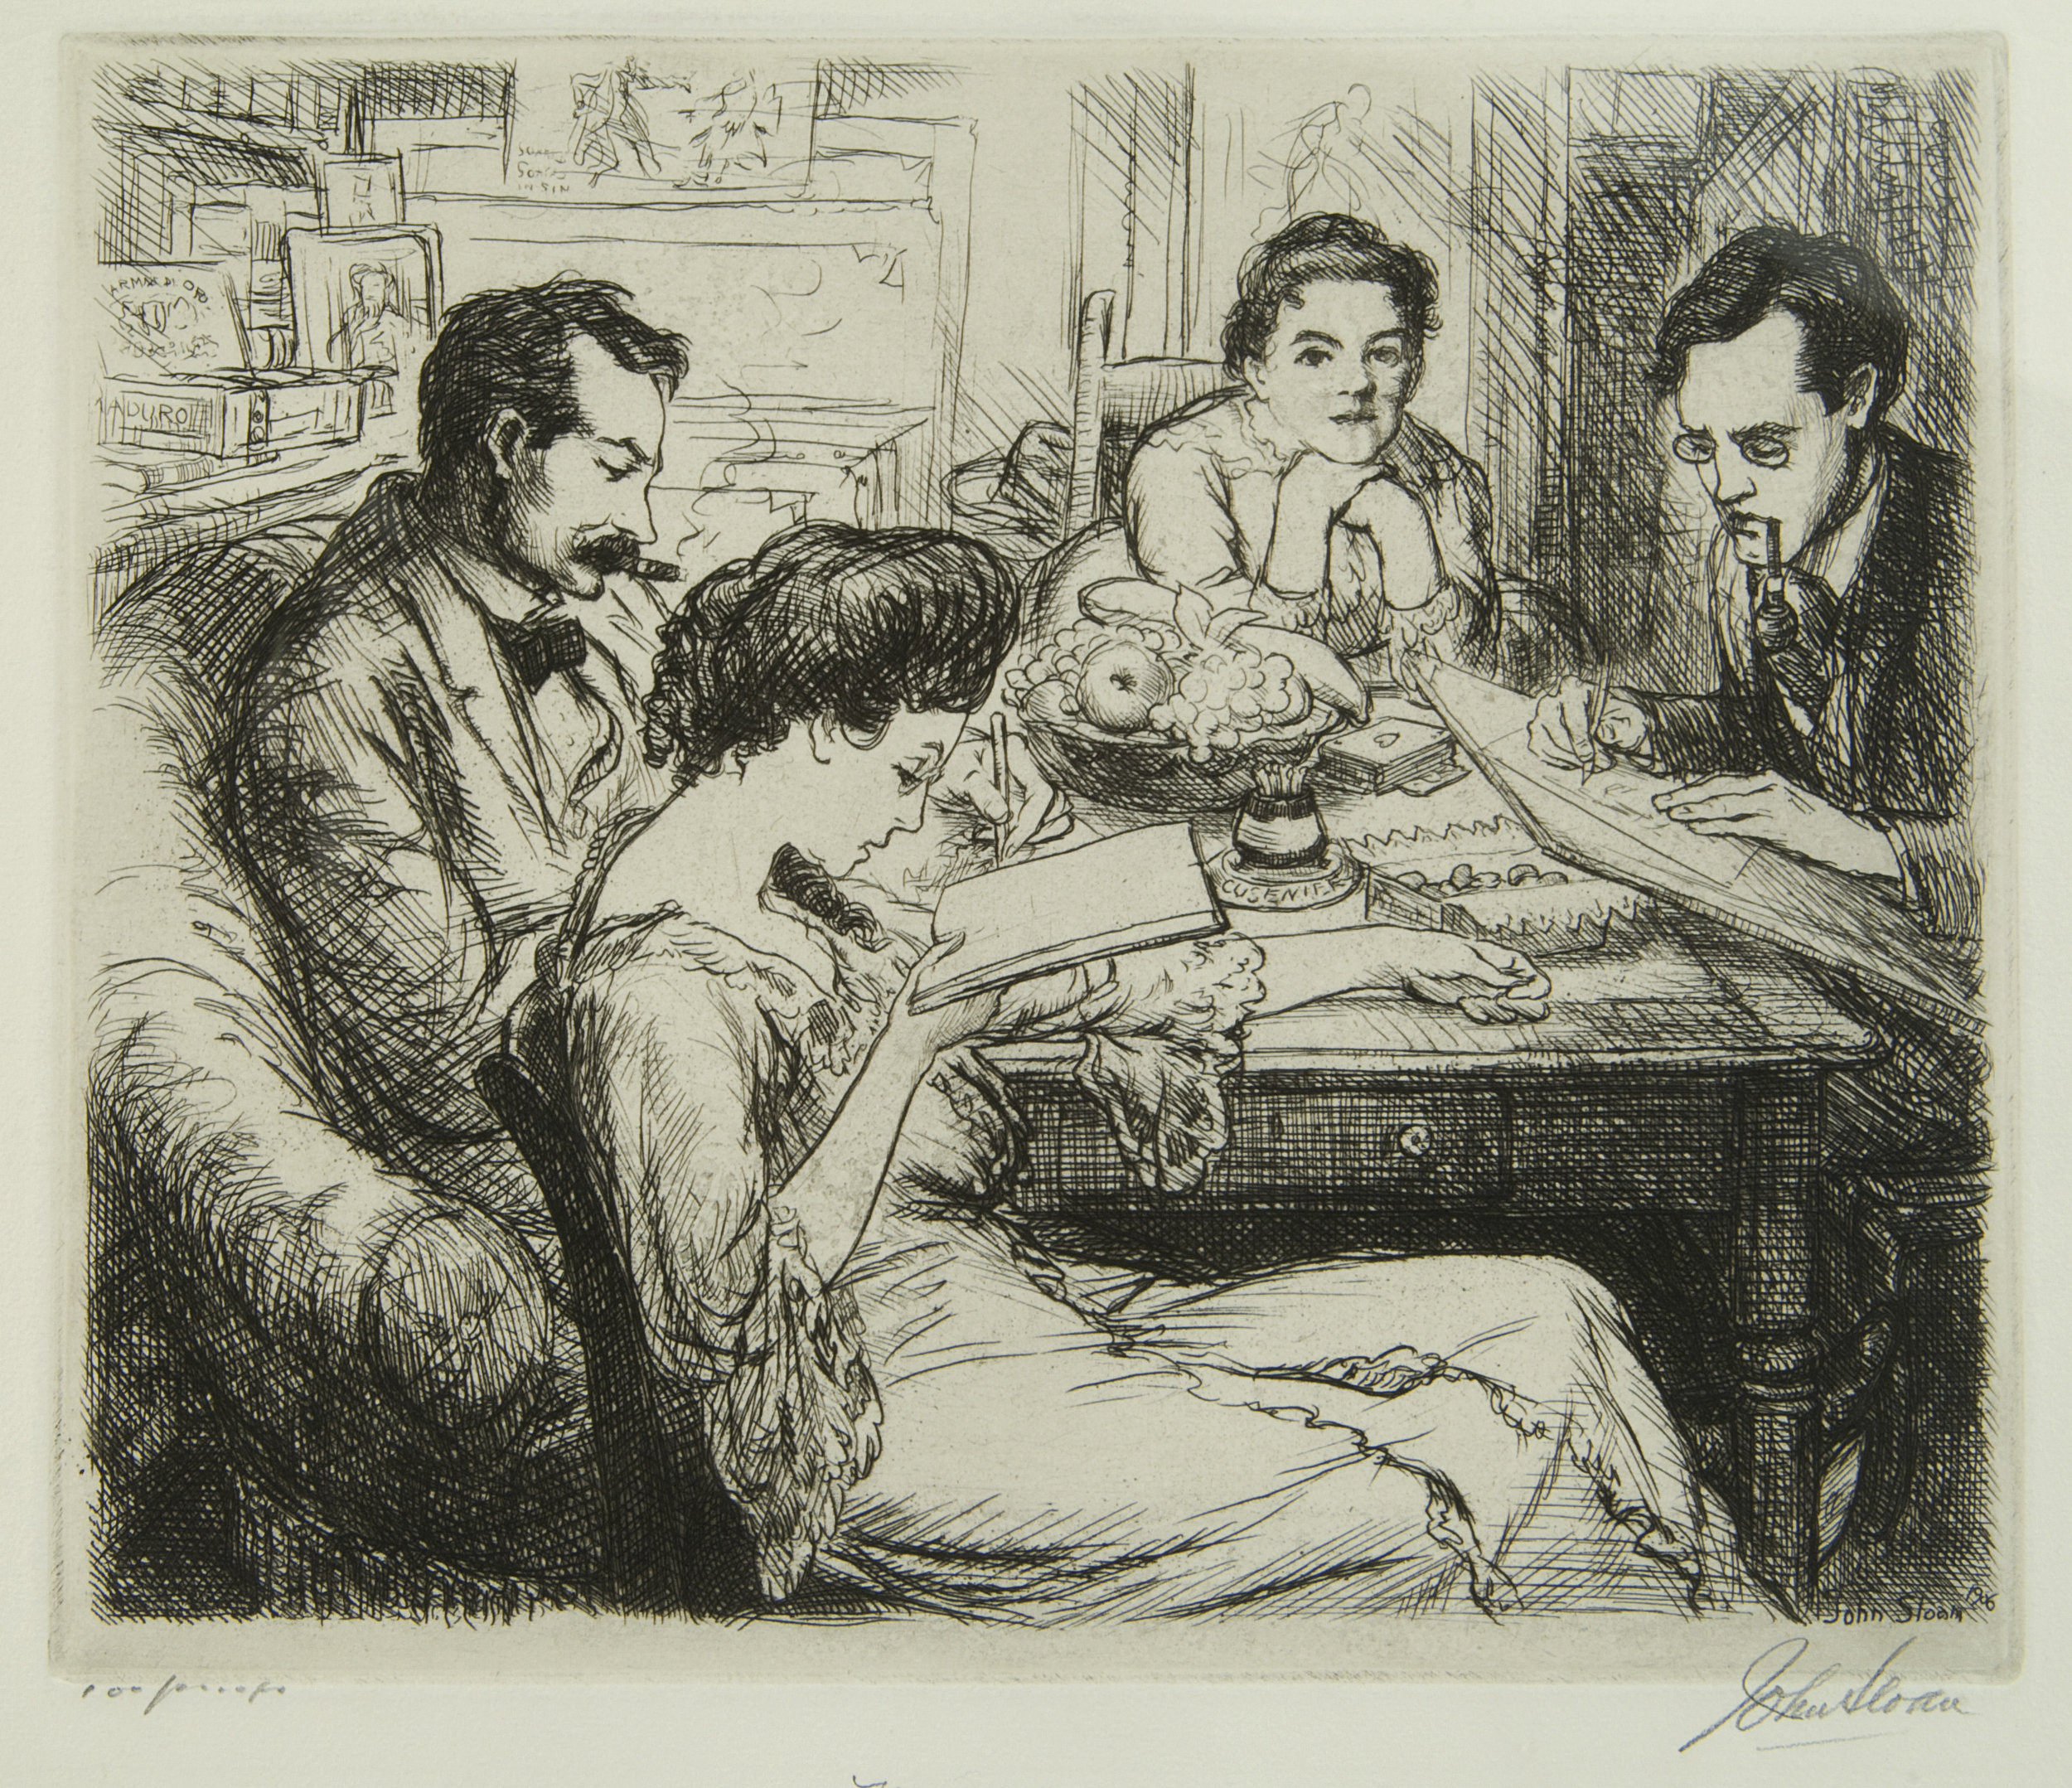 Etching of four figures sitting at a table, two men and two women. One reads while smoking, a woman reads, a man draws, and a woman looks at the viewer